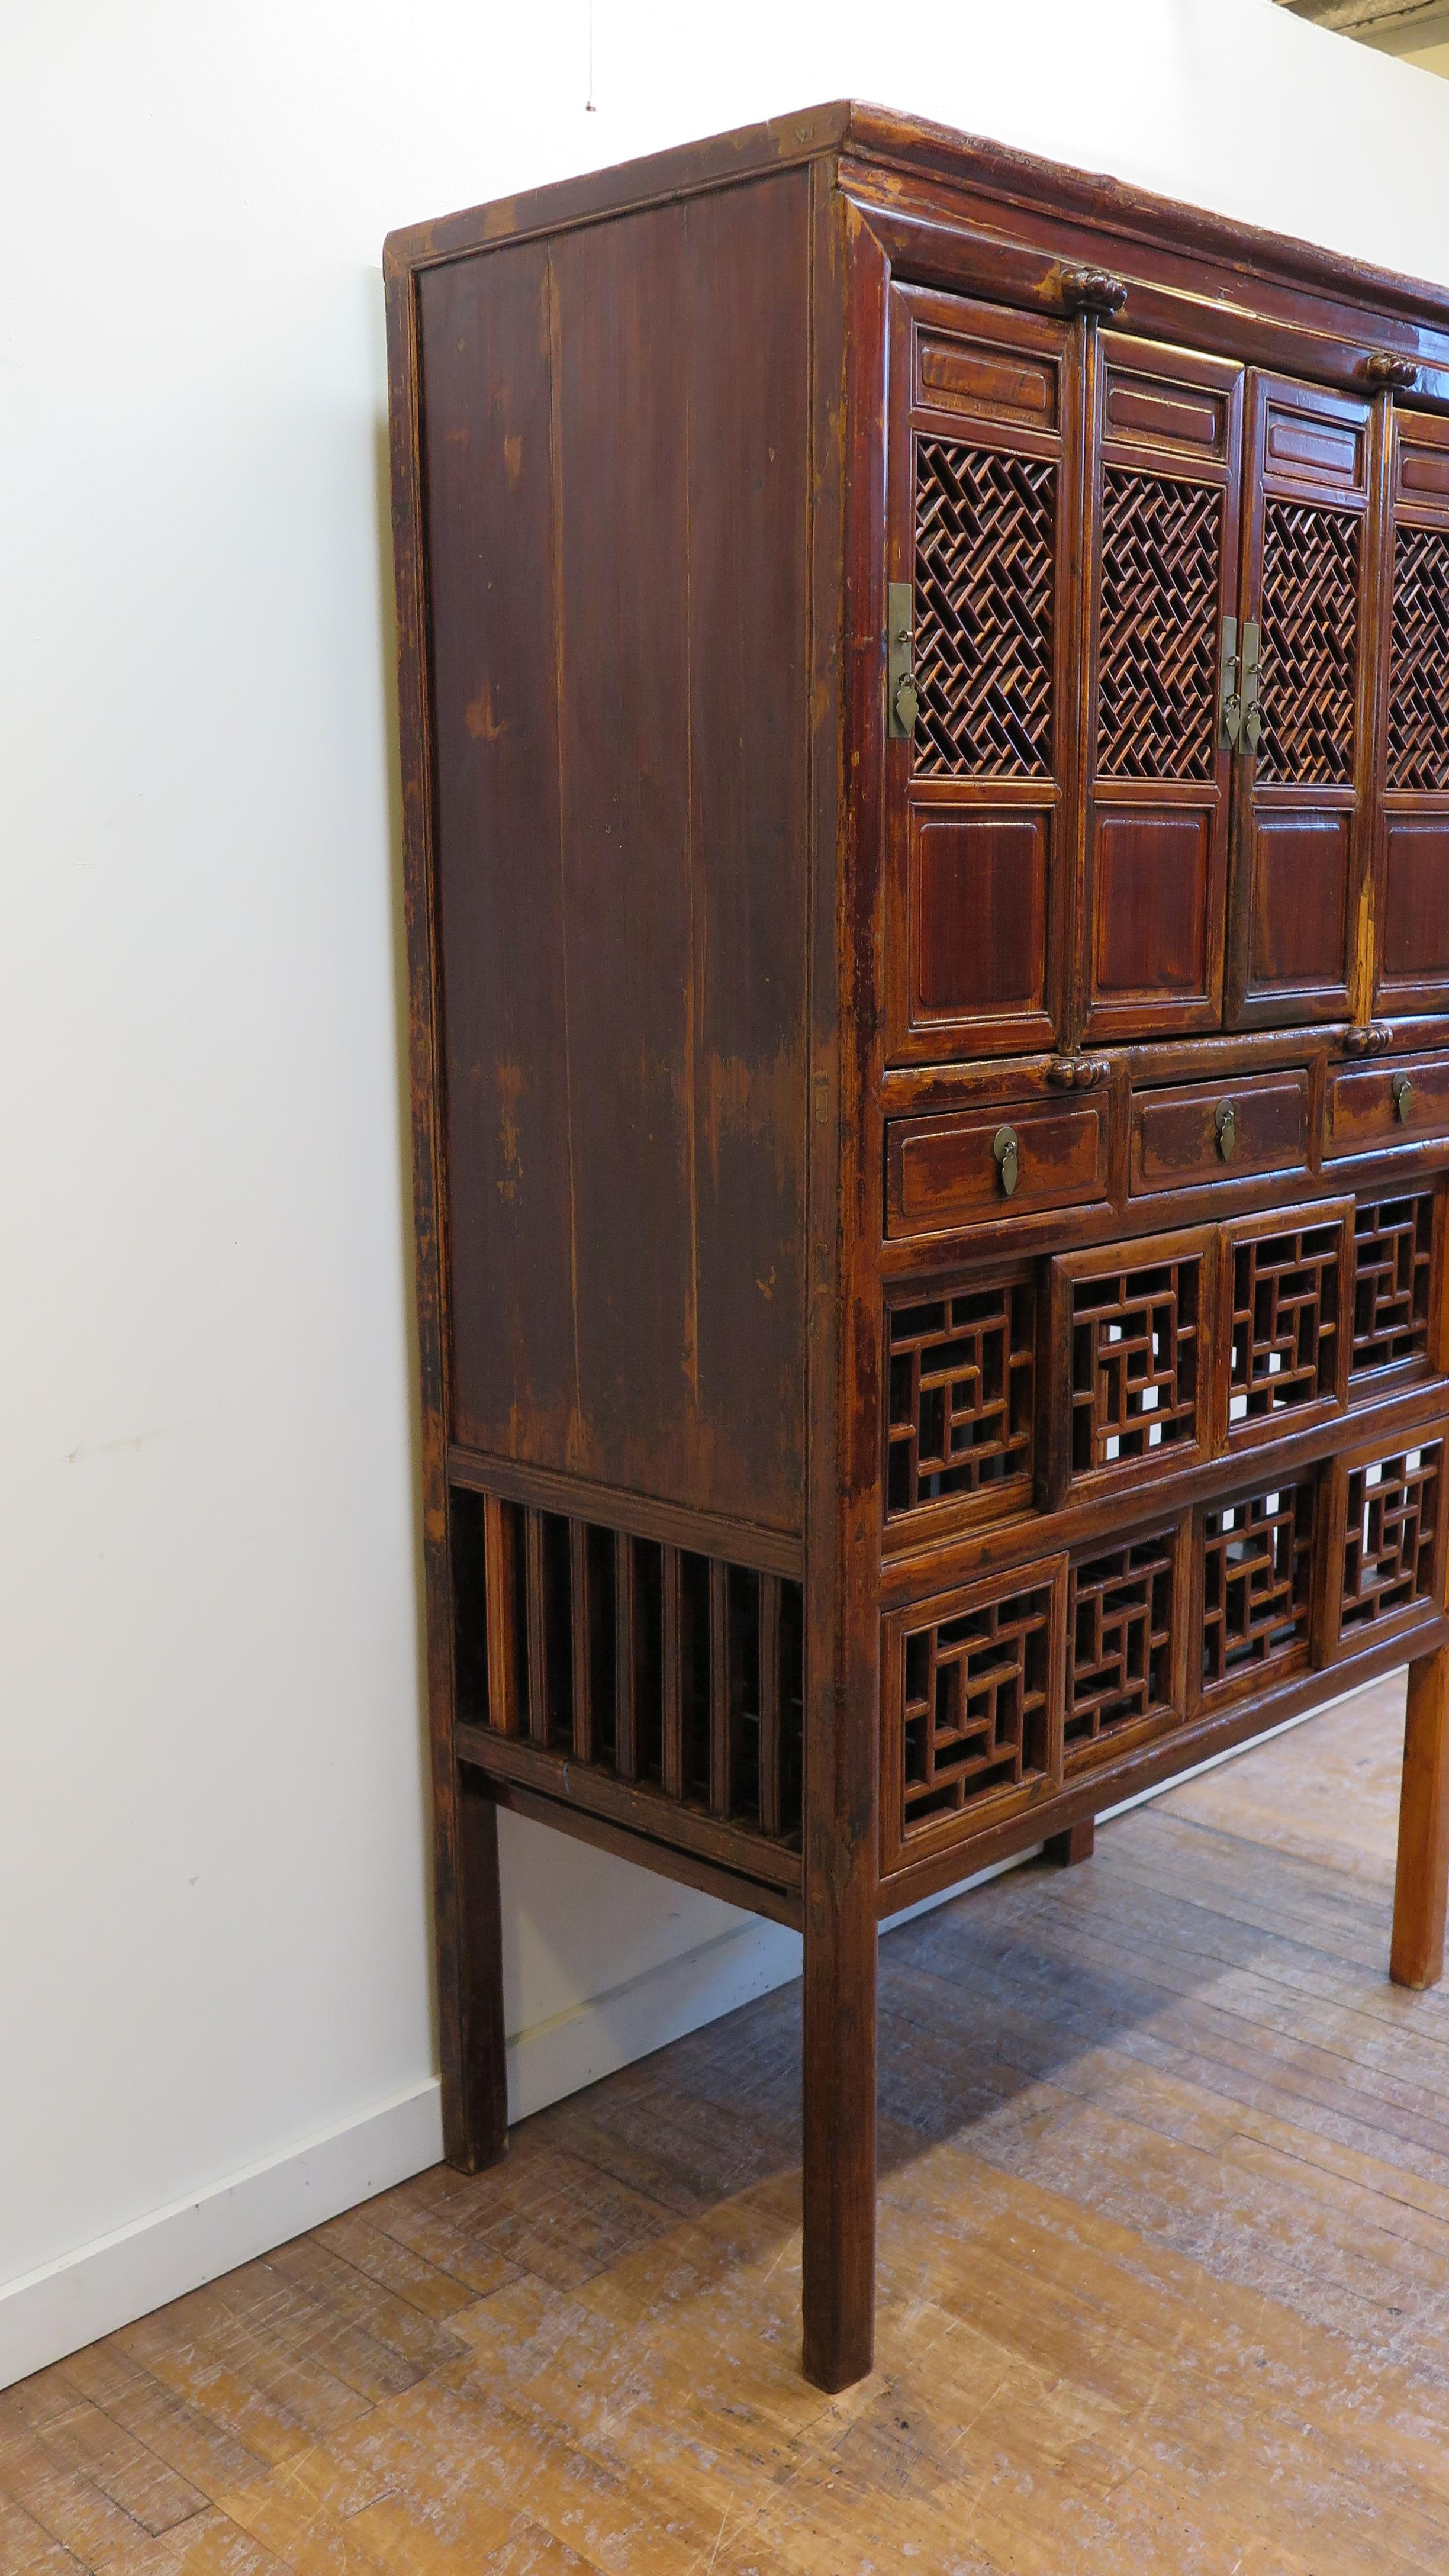 19th century pantry cabinet Chinese kitchen cabinet. Antique kitchen cabinet cupboard. Cyprus wood with intricate fretwork screen doors, and sides. These types of cabinets where mostly used to store food allowing for air circulation. Traditional